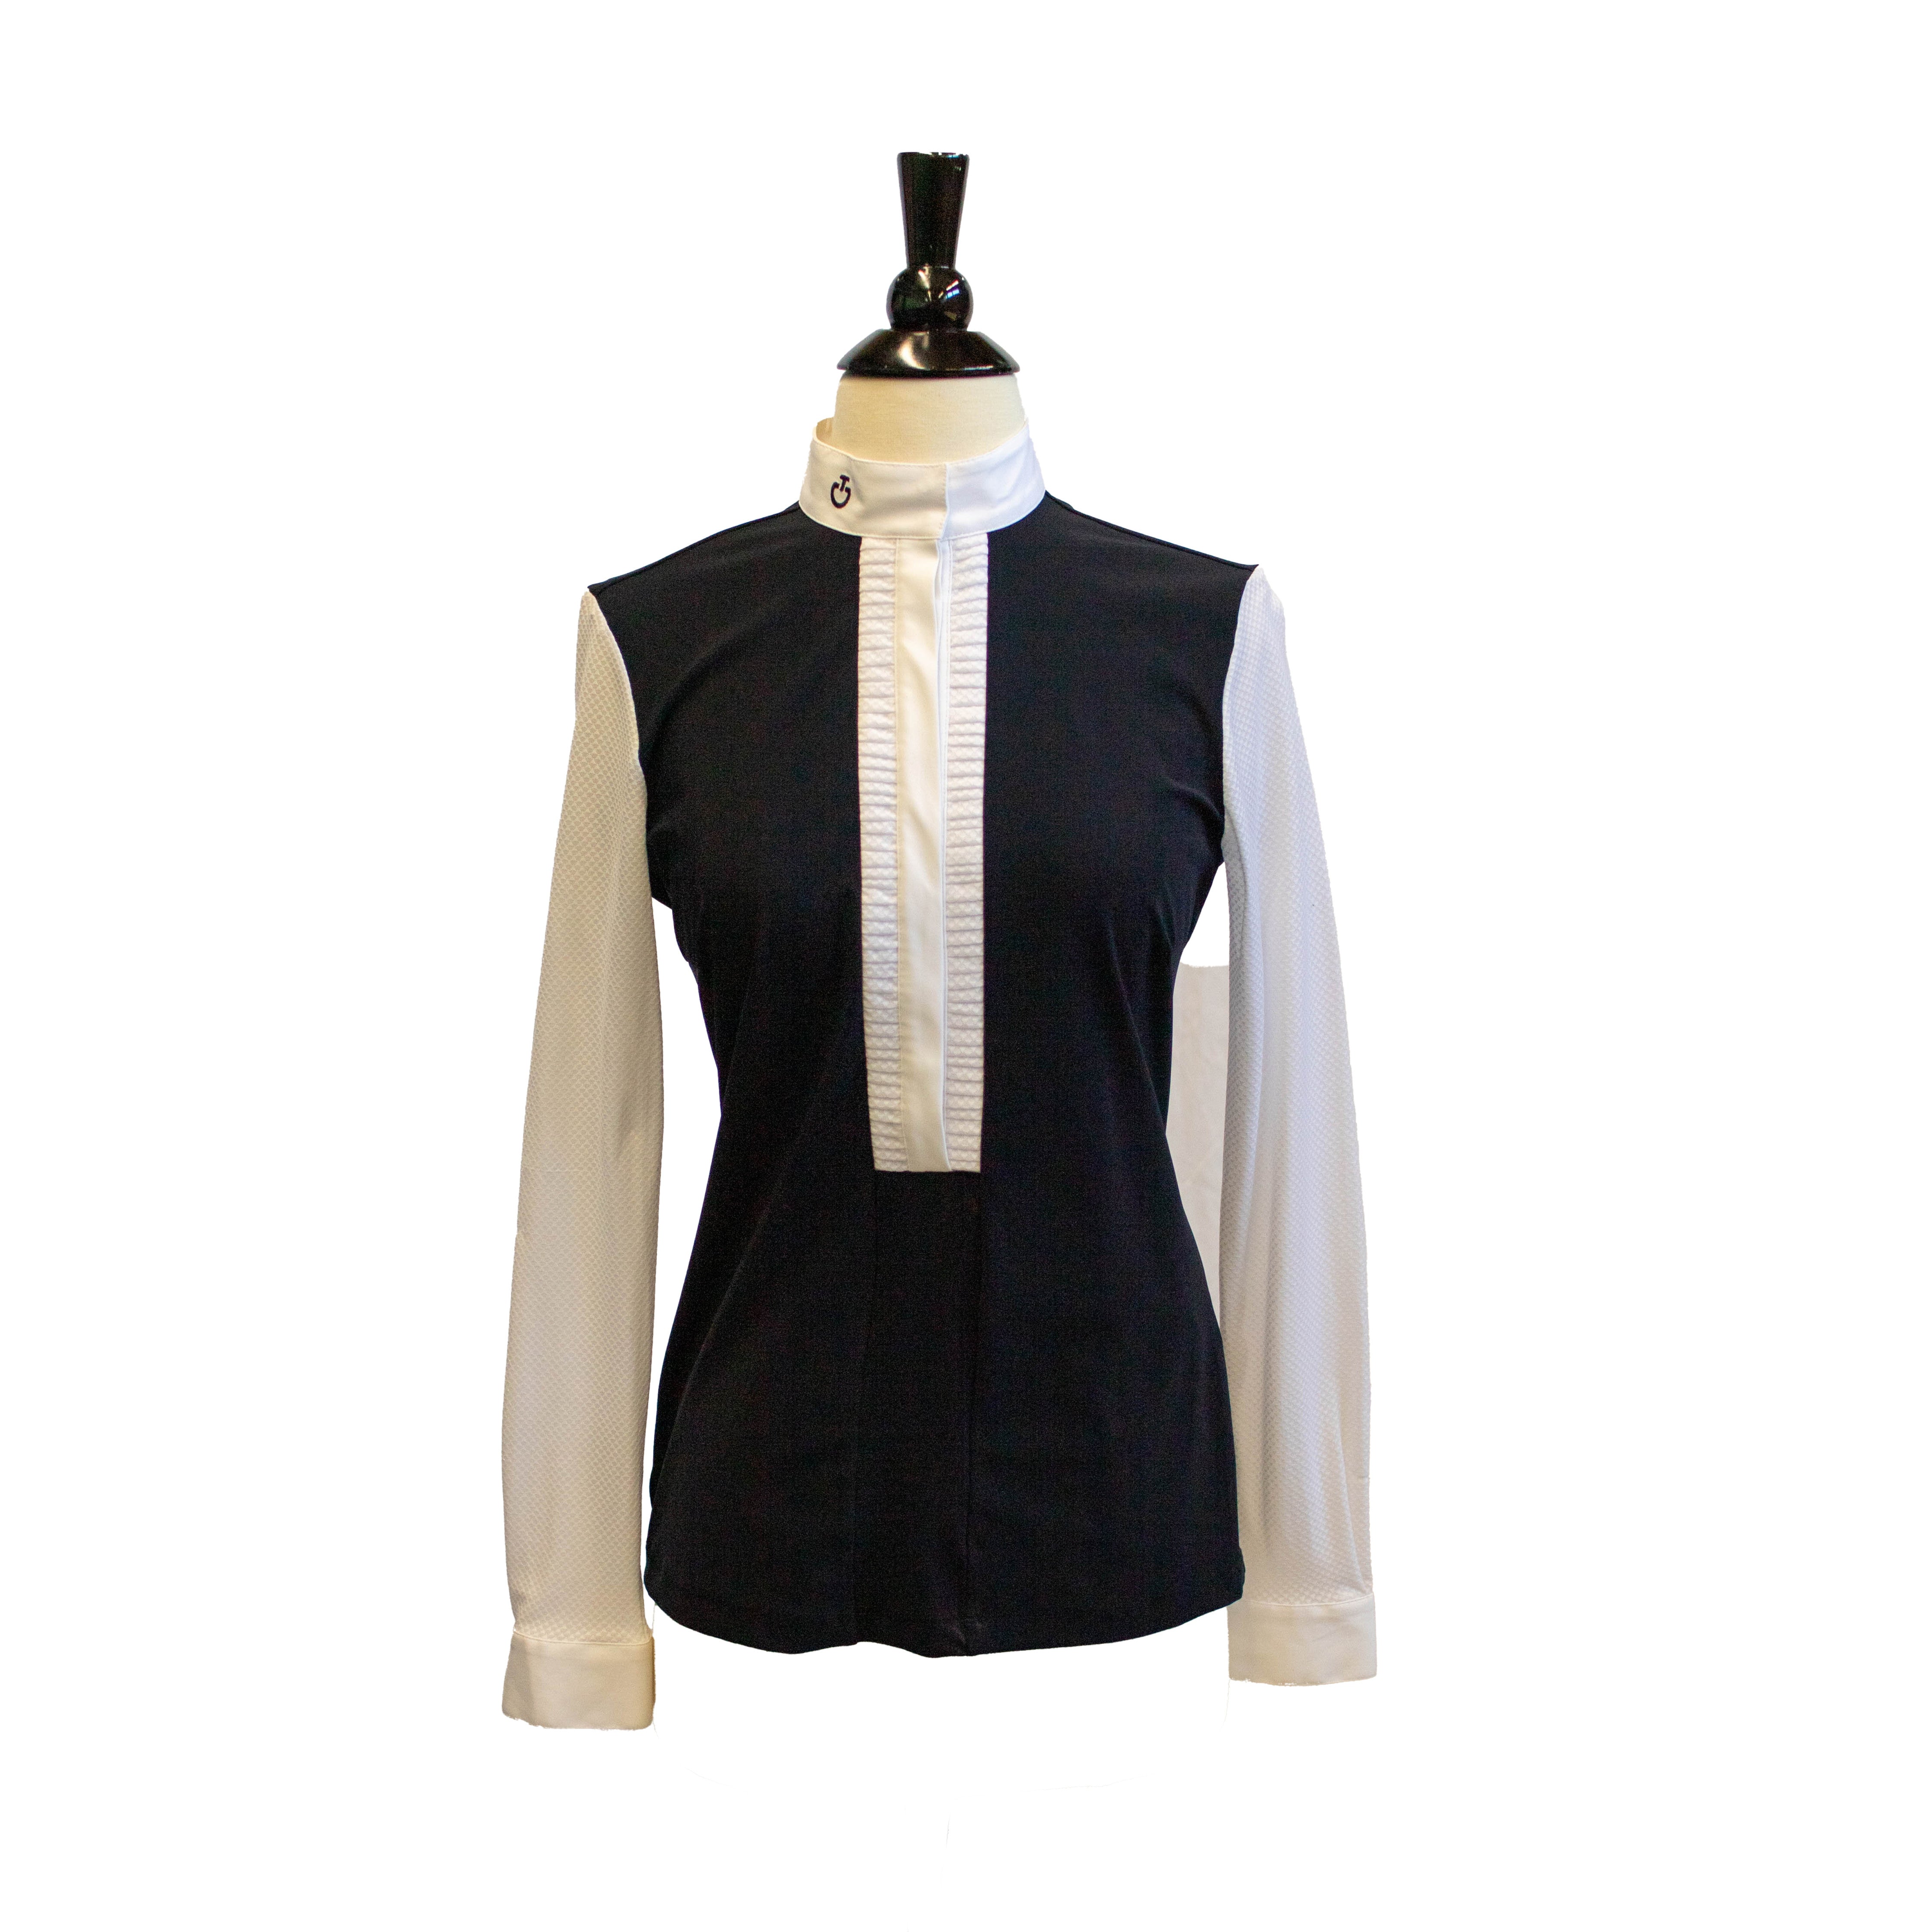 CT Pleated Jersey Shirt ladies